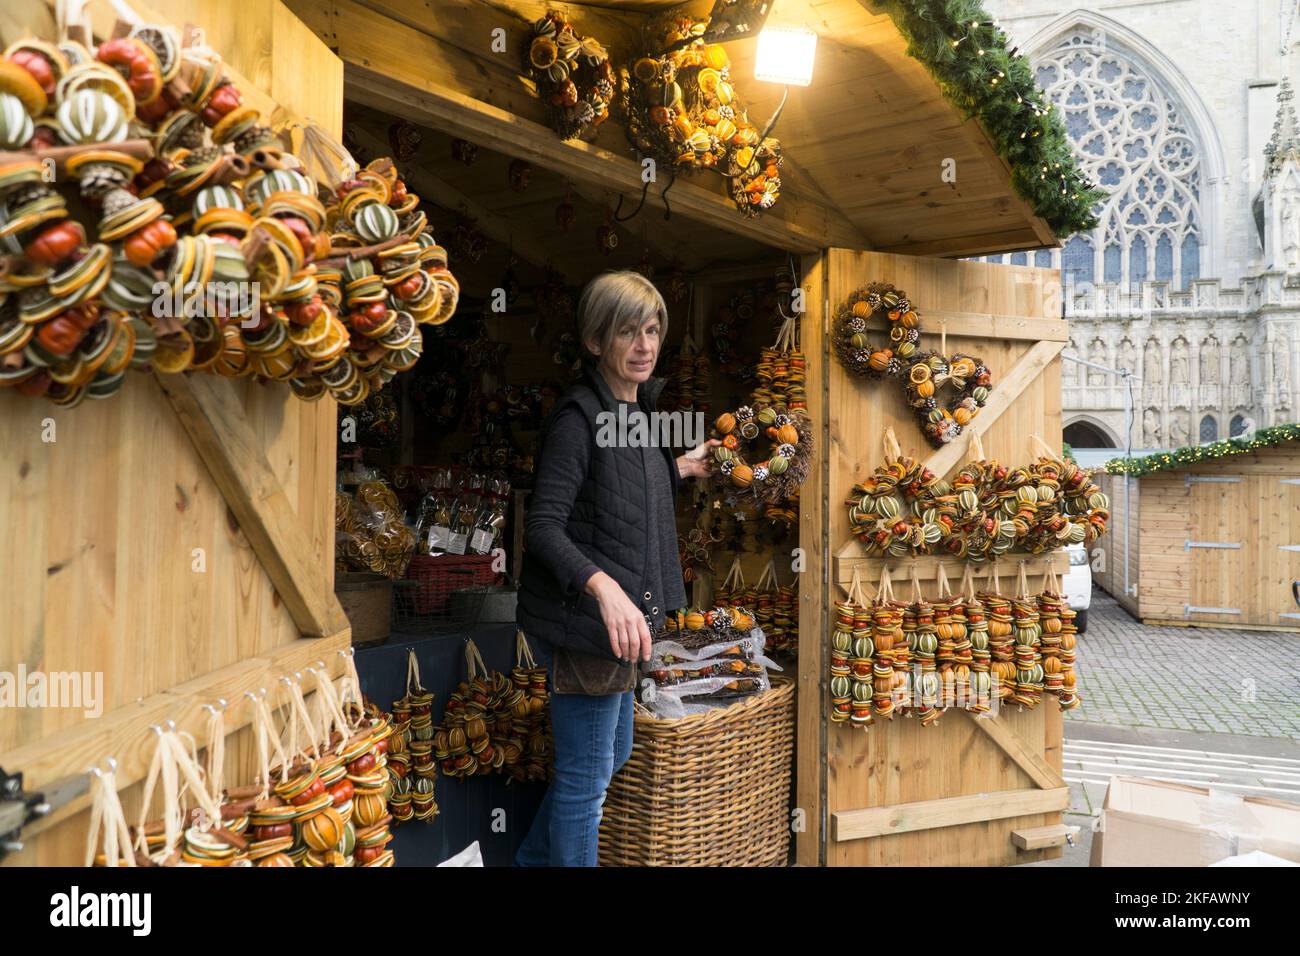 Exeter, UK, 17 November 2022: Vendors are setting up their stalls for the opening of the Exeter Christmas market tomorrow. Clayre, who works for the Devon-based firm Pollyfields, decorates their chalet-style stall with scented dried fruit wreaths. Anna Watson/Alamy Live News Stock Photo